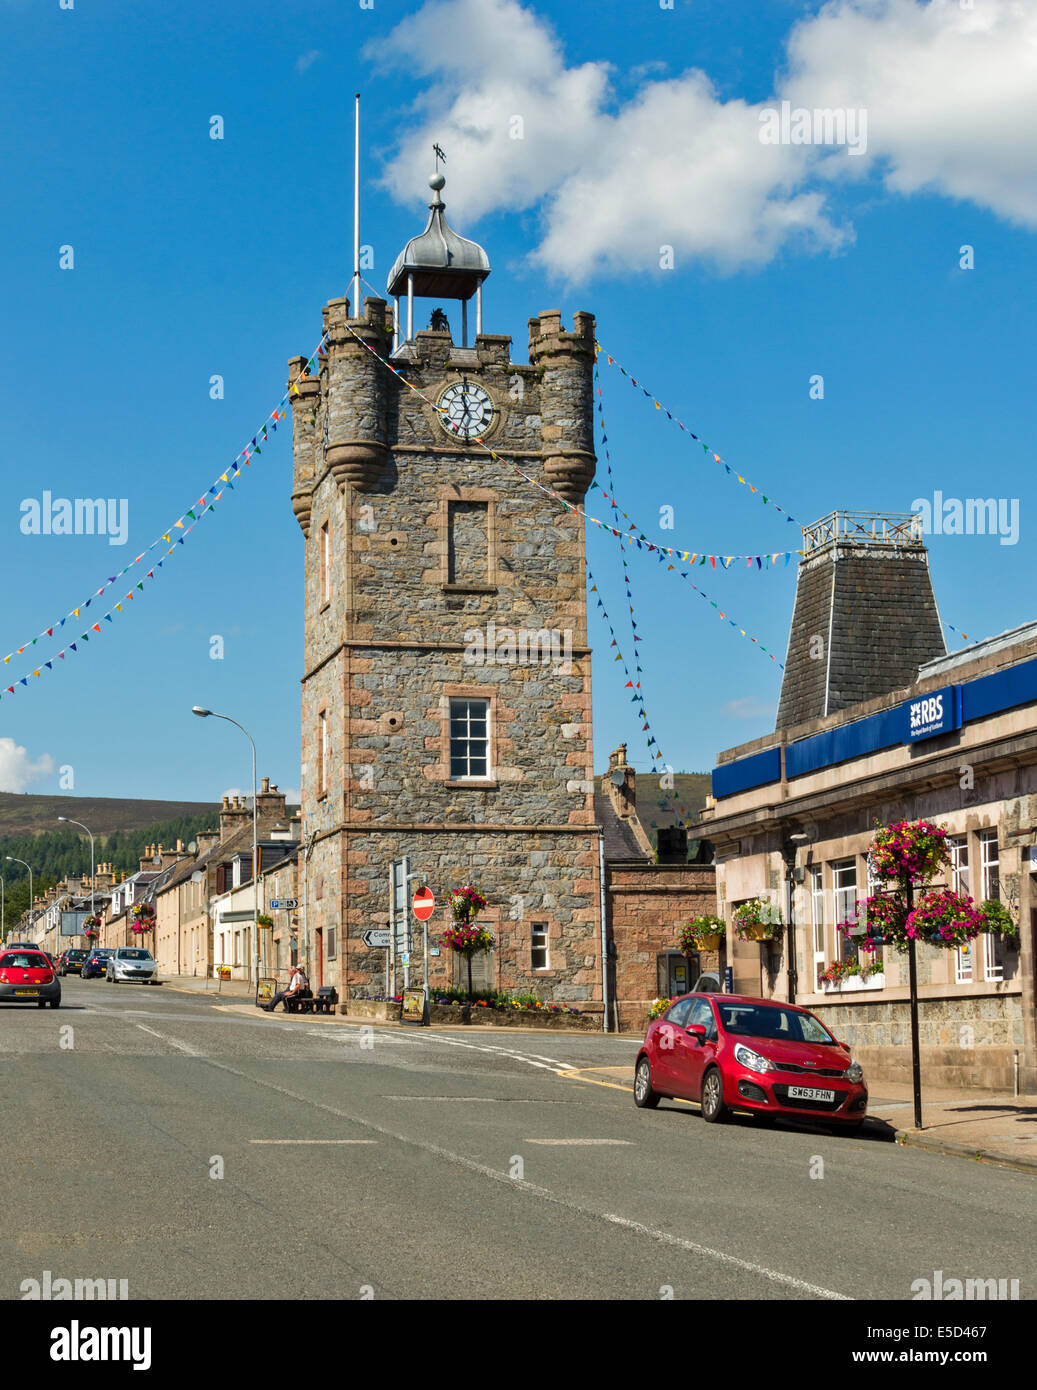 DUFFTOWN ABERDEENSHIRE SCOTLAND THE CLOCK TOWER AND FLOWER DISPLAYS Stock Photo